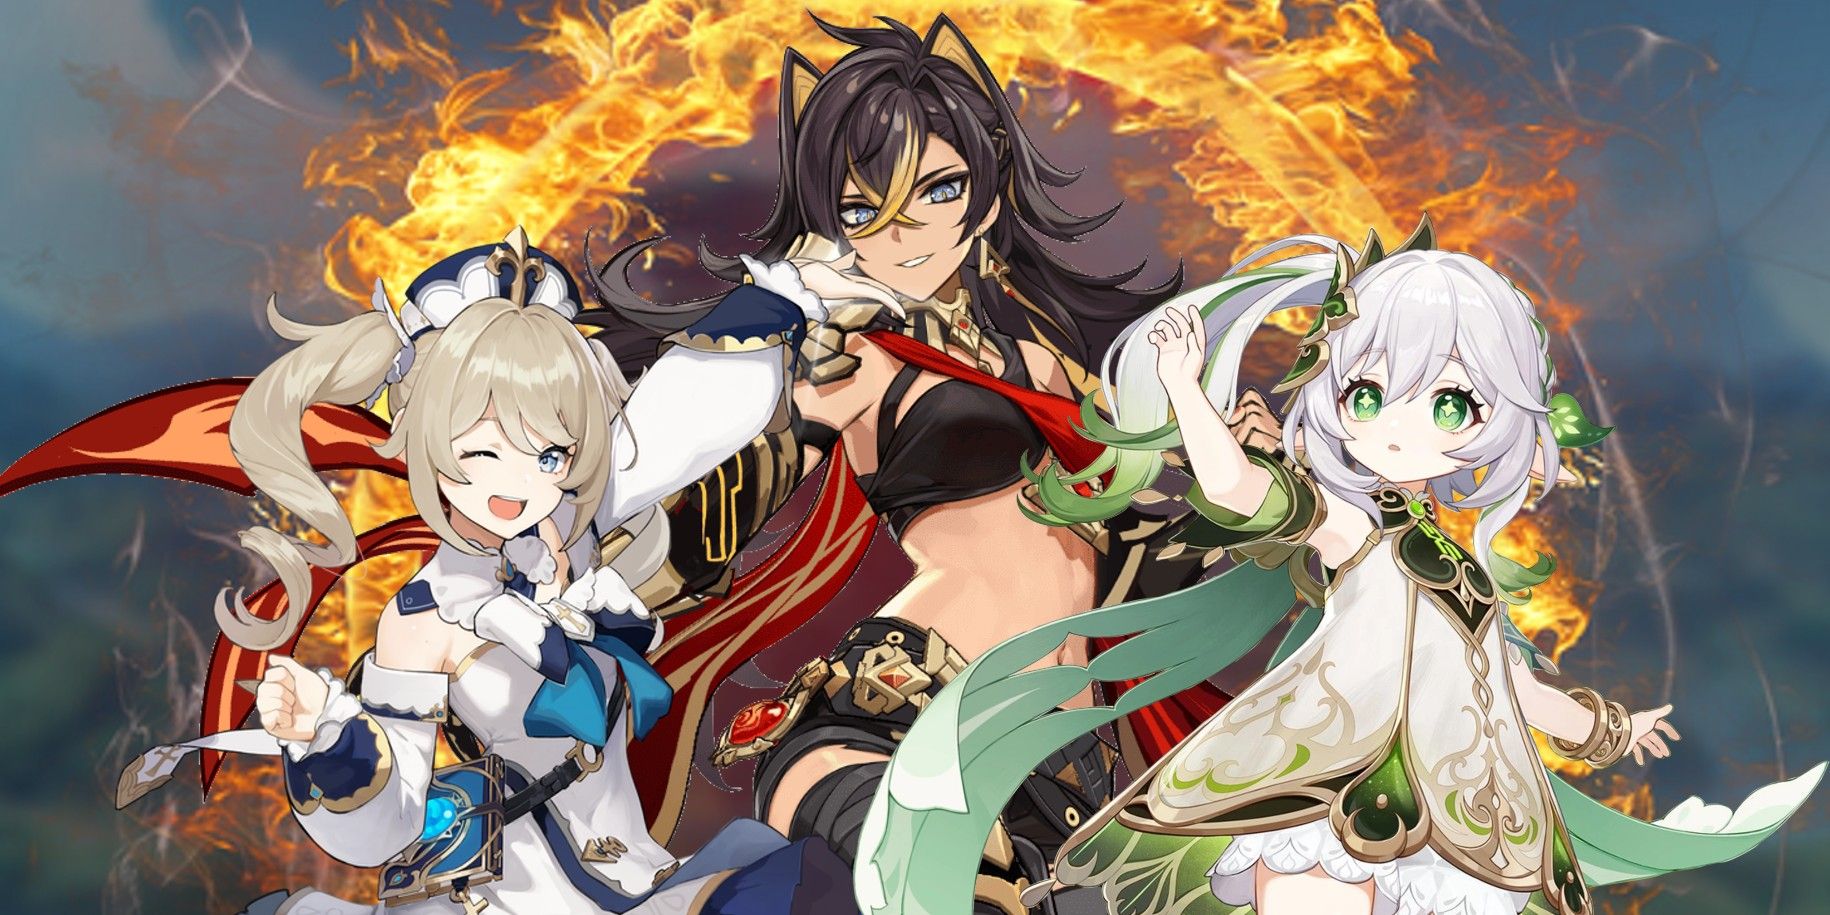 Genshin Impact's Dehya in the middle with Barbara to her left and Nahida to the right. Behind them is a half-circle of fire and blurred-out in the background is an image of the Sumeru landscape.